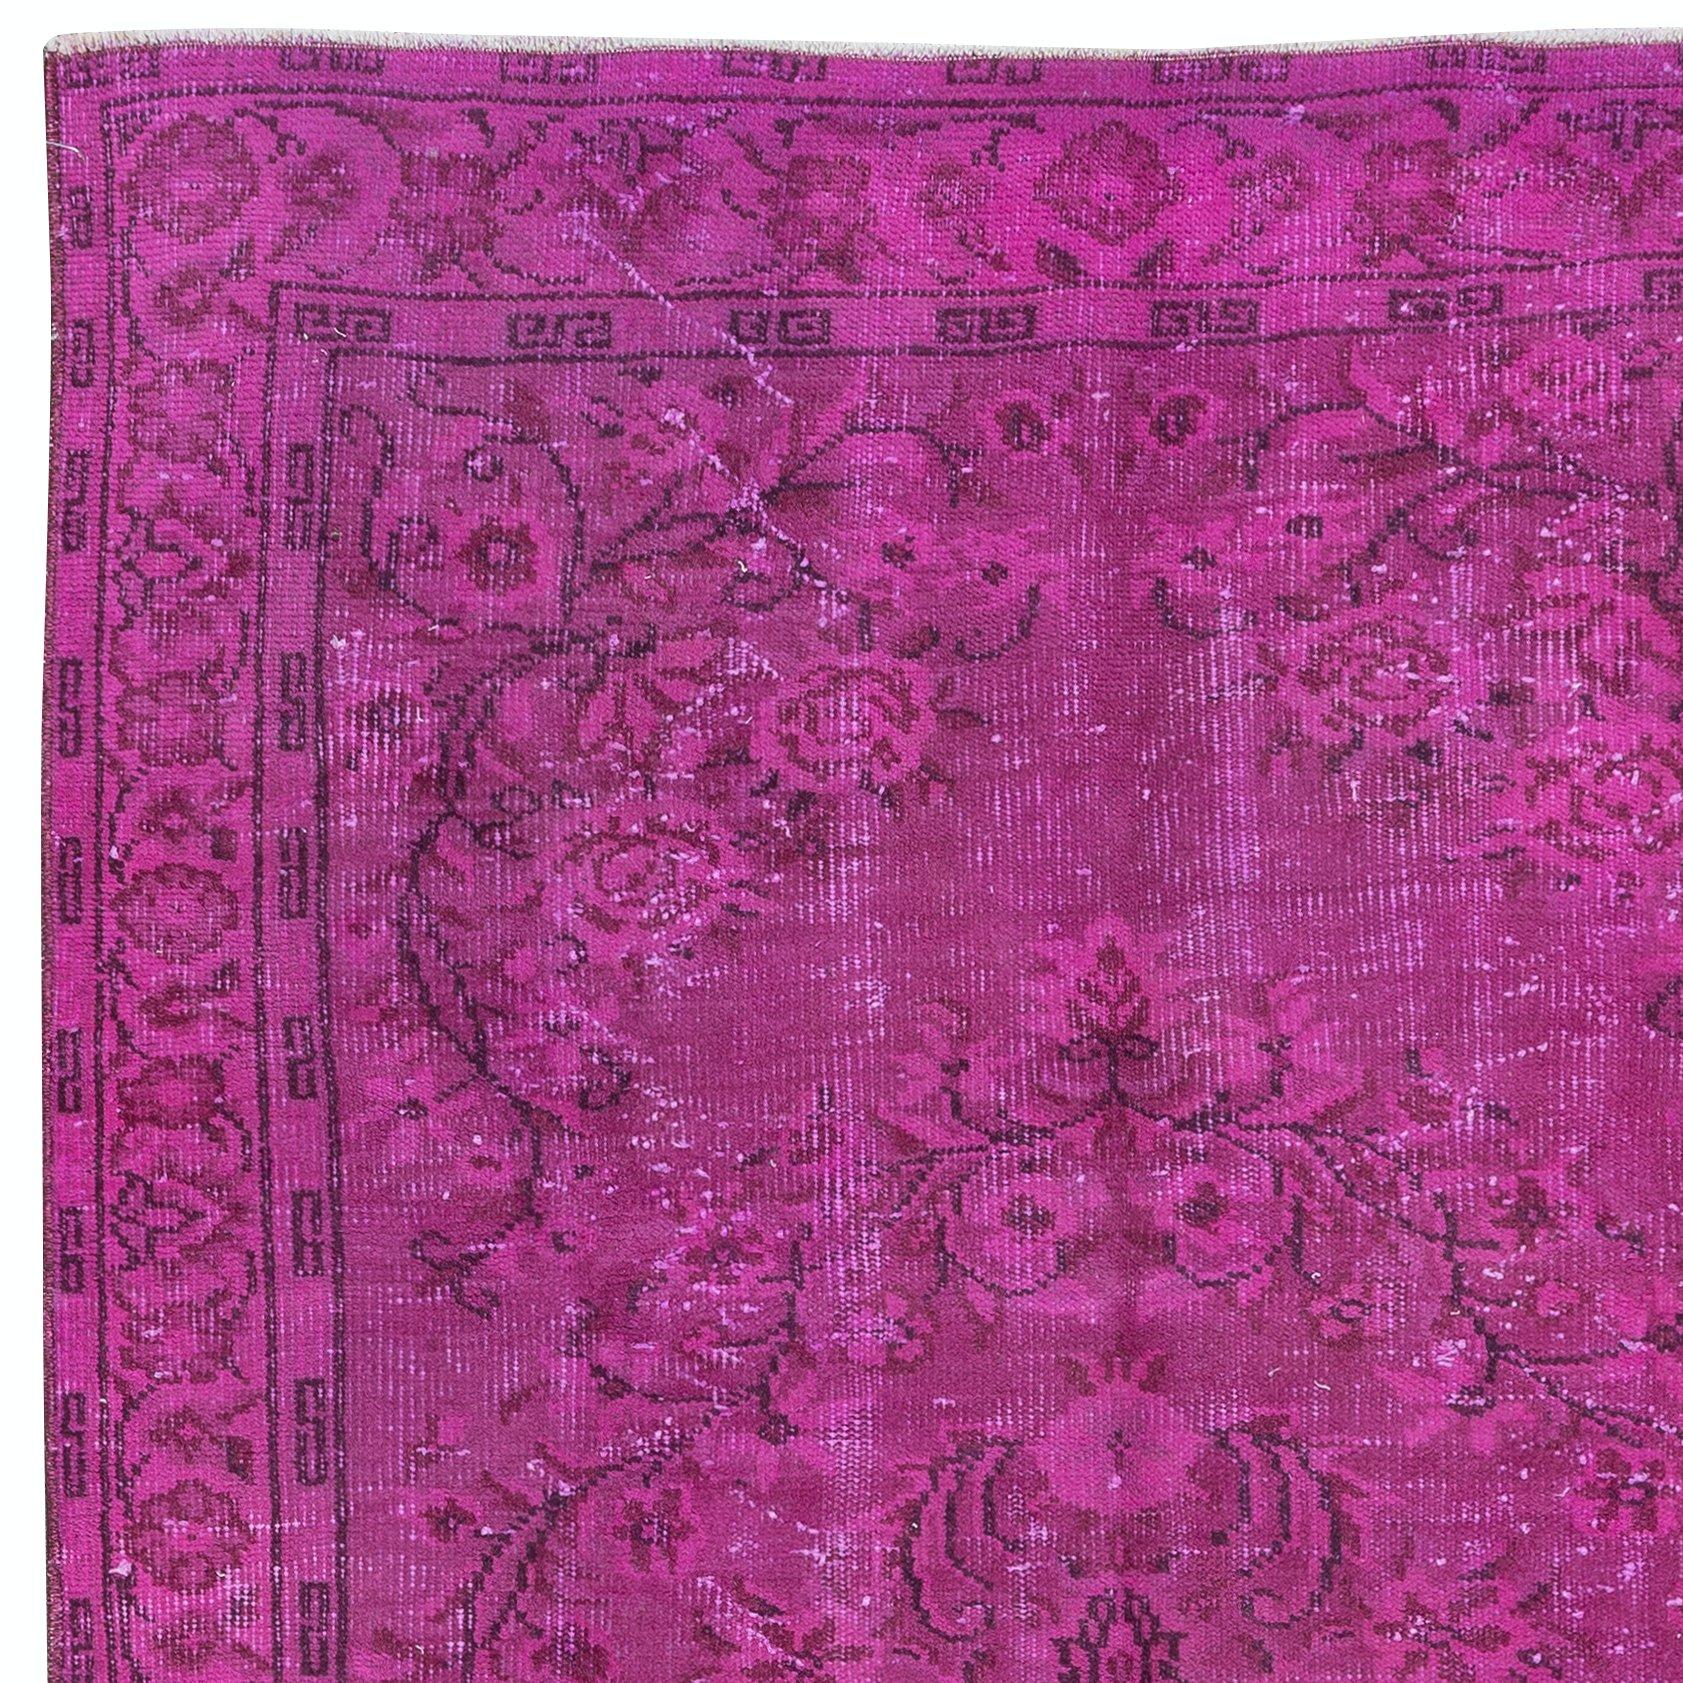 Hand-Woven 4.5x7.8 Ft Contemporary Pink Area Rug, Handmade Turkish Carpet, Floor Covering For Sale